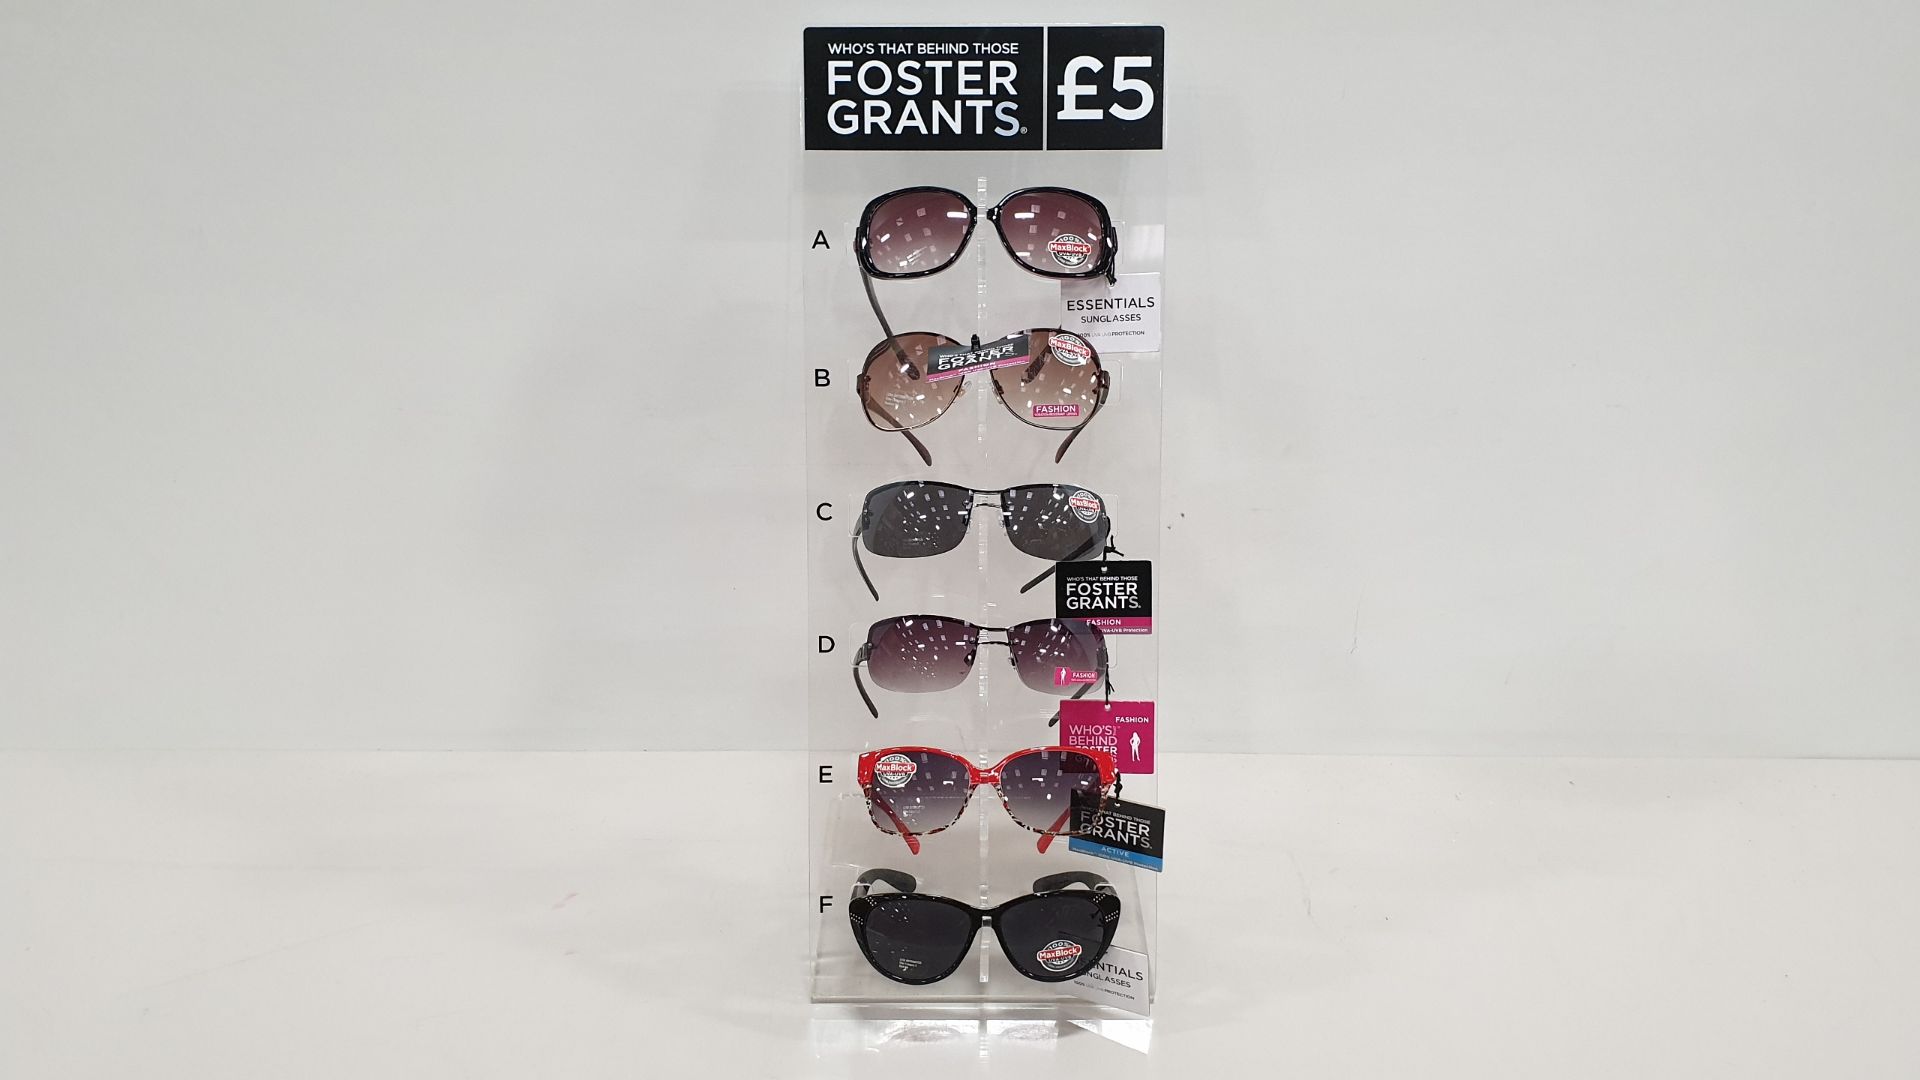 240 X BRAND NEW FOSTER GRANTS FASHION SUNGASSES IN VARIOUS STYLES (TOTAL RRP £1,200.00) - IN ONE